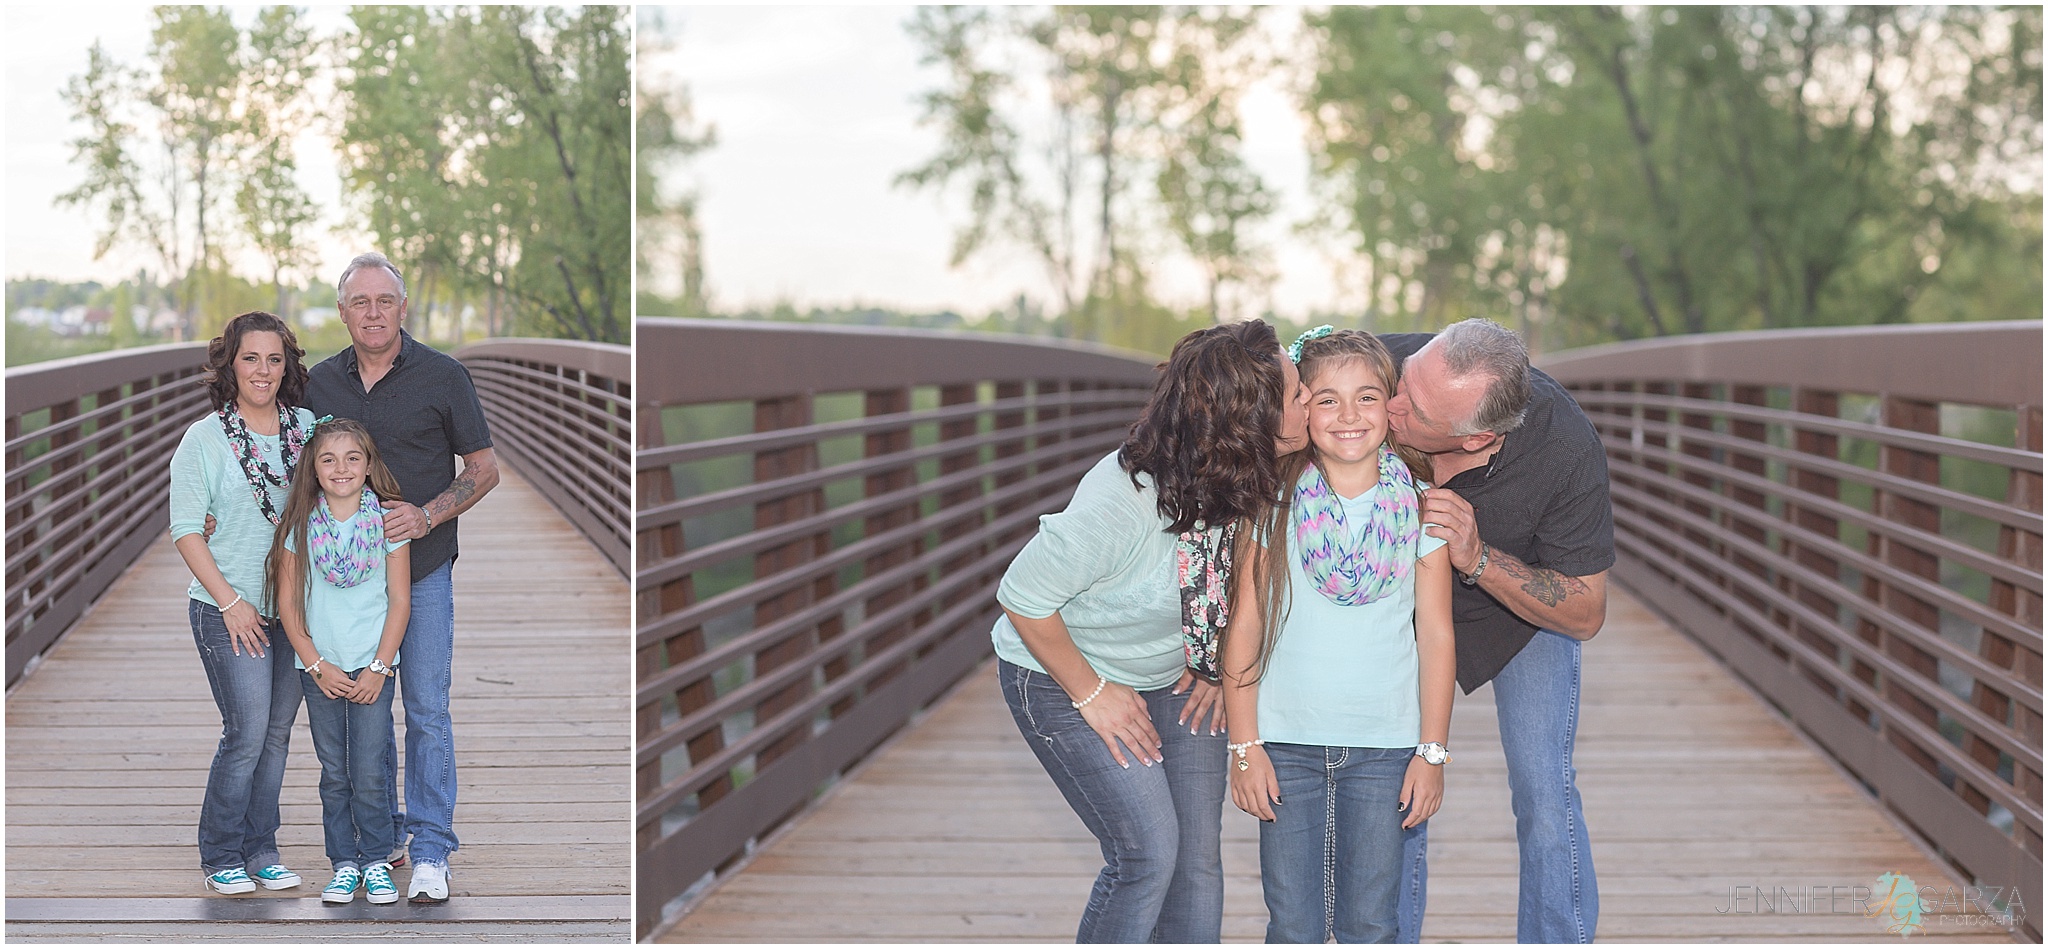 The Schlegel Family - Family Photography Session at Golden Ponds Nature Area in Longmont, Colorado